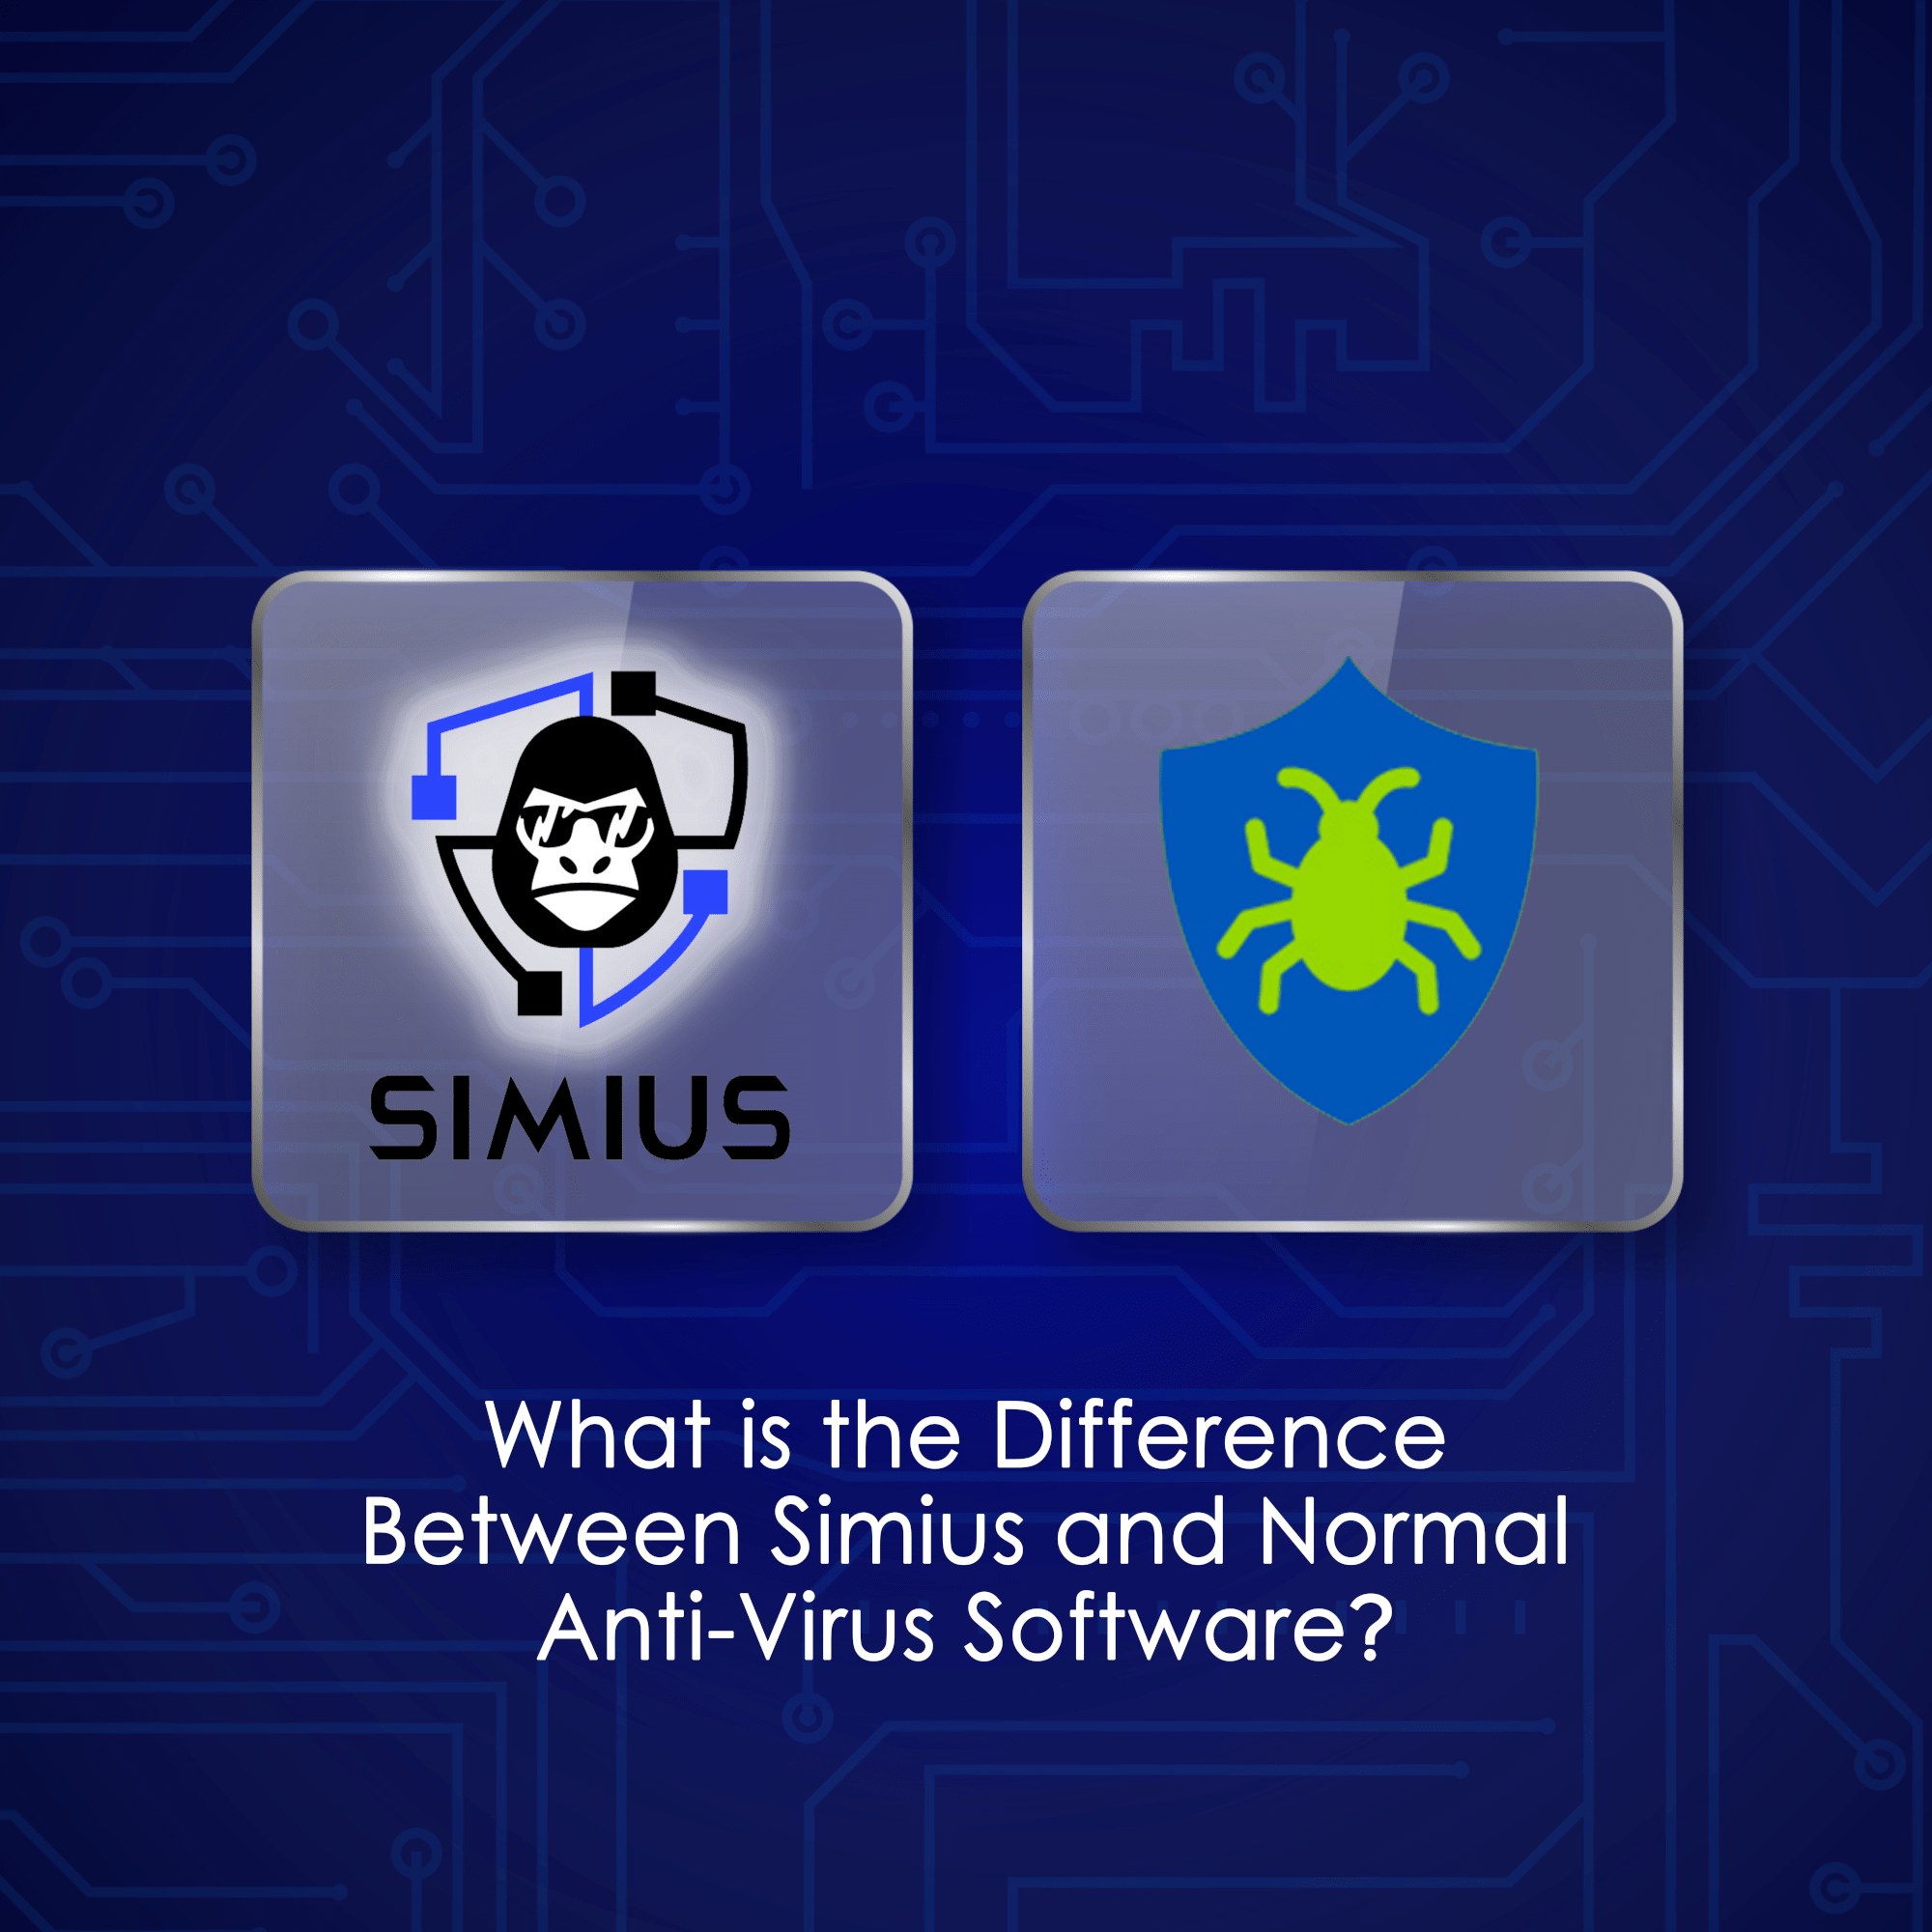 What is the Difference Between Simius and Normal Anti-Virus Software?